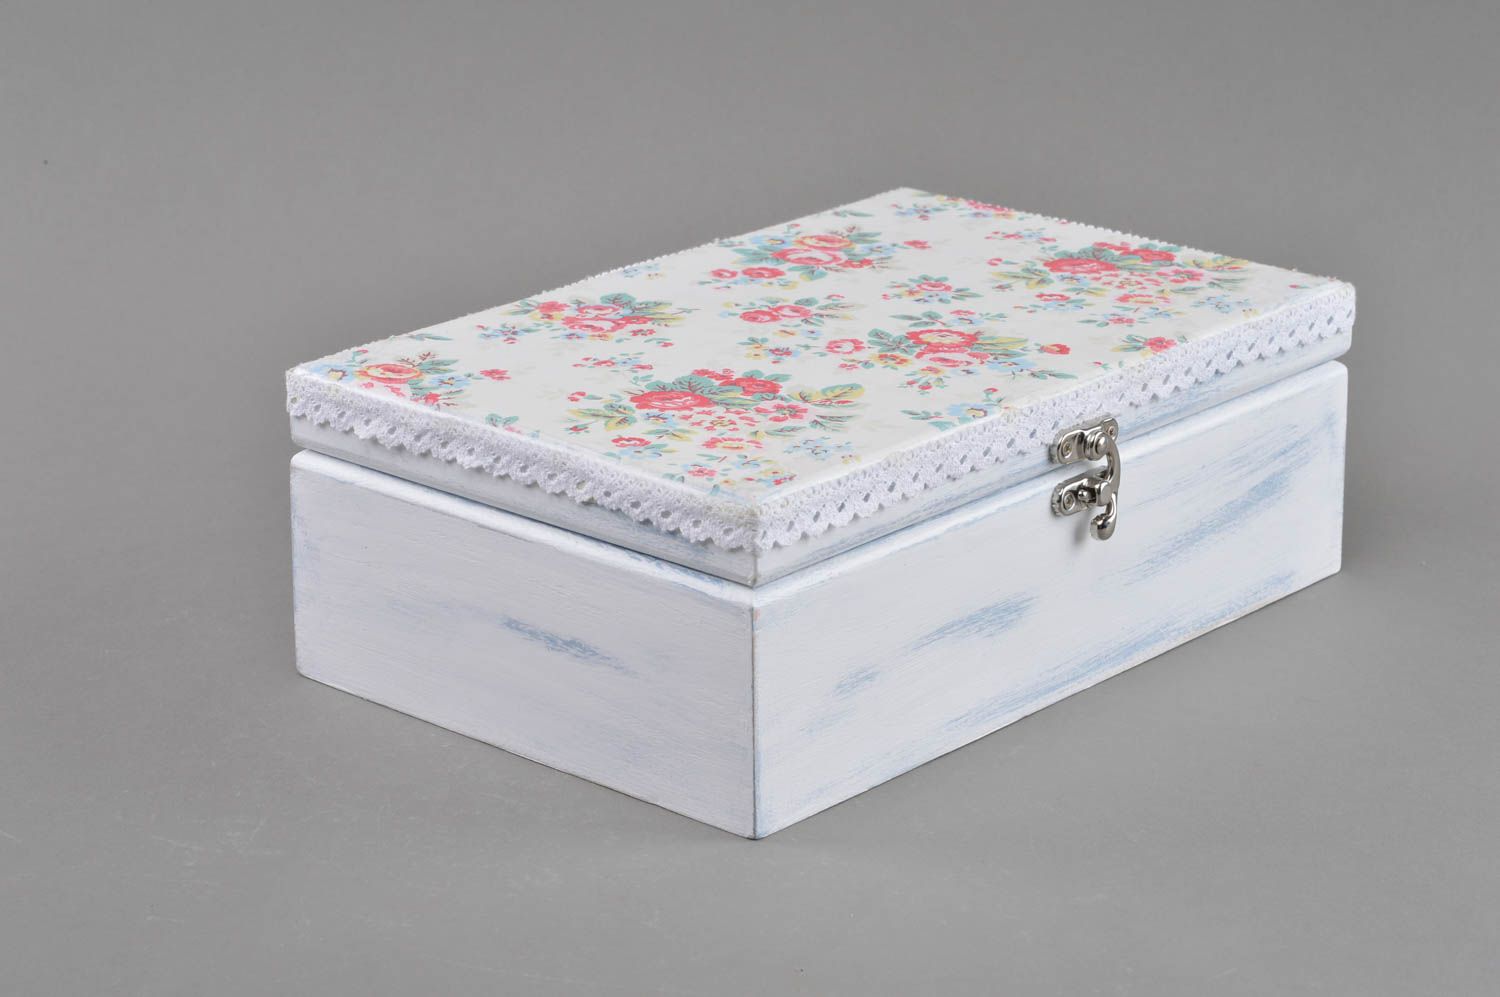 Handmade designer decoupage wooden jewelry box white with floral pattern photo 1